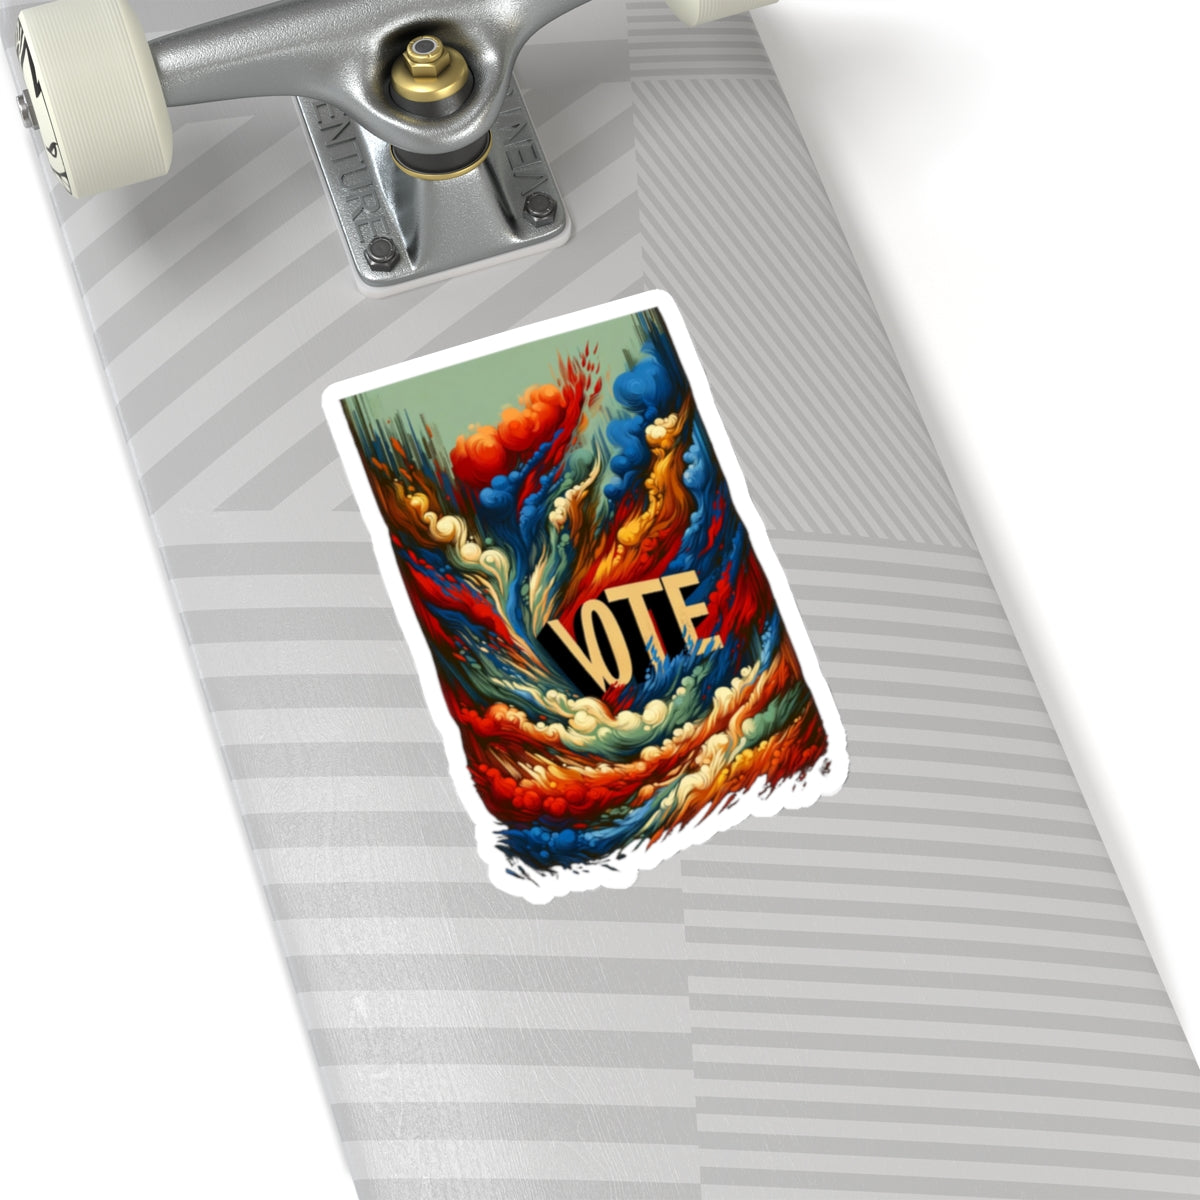 Inspirational Statement Sticker: VOTE! for laptop, kindle, phone, ipad, instrument case, notebook, mood board, wall